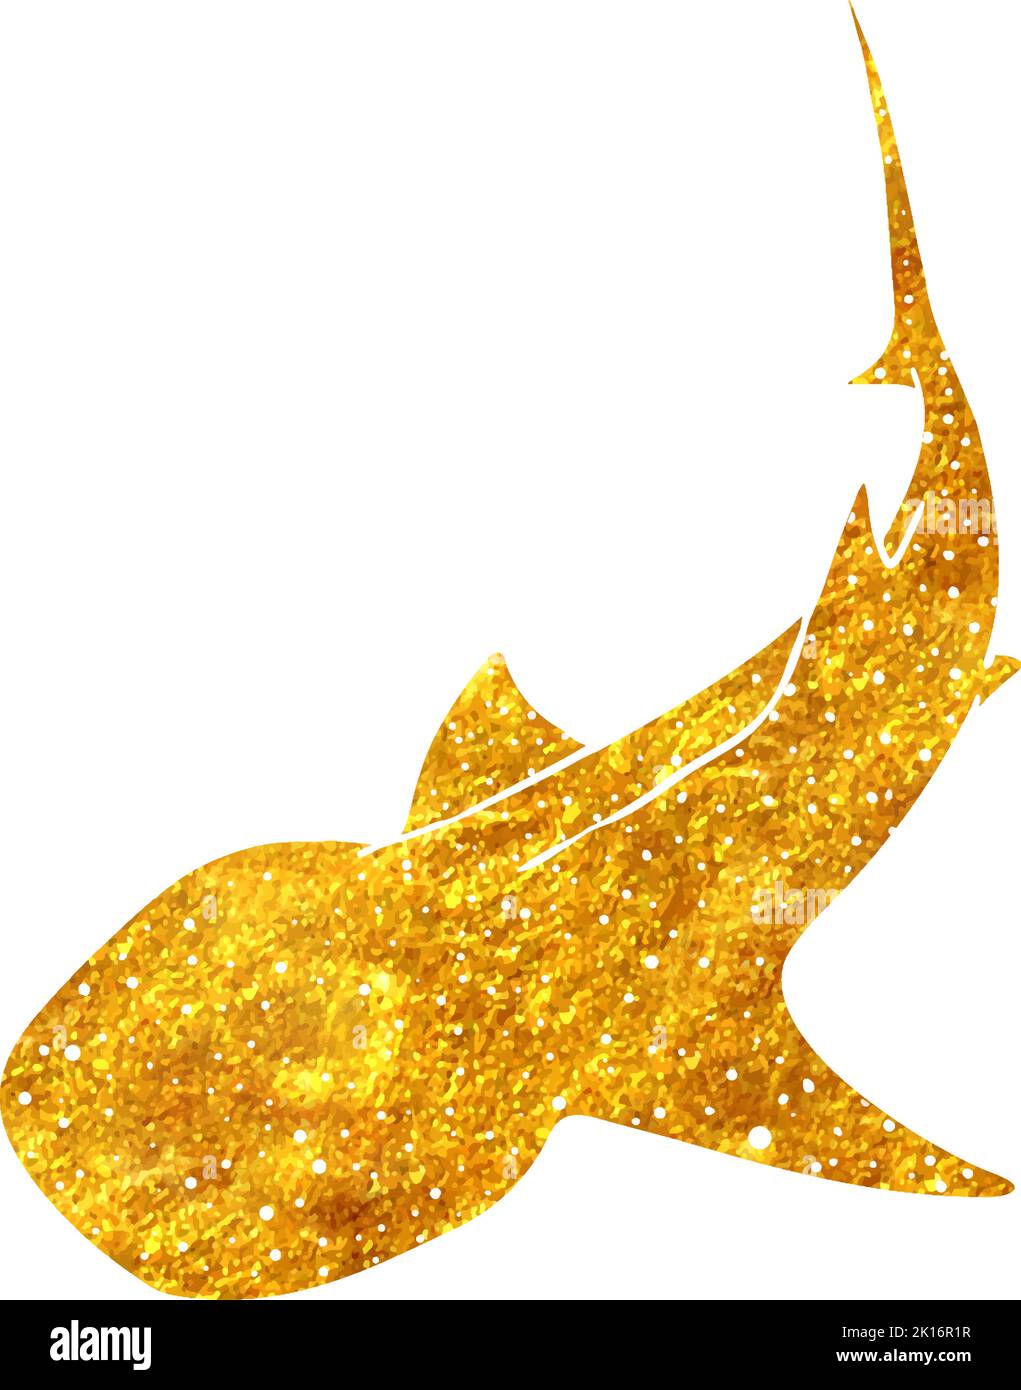 Hand drawn whale shark in gold foil texture vector illustration Stock Vector